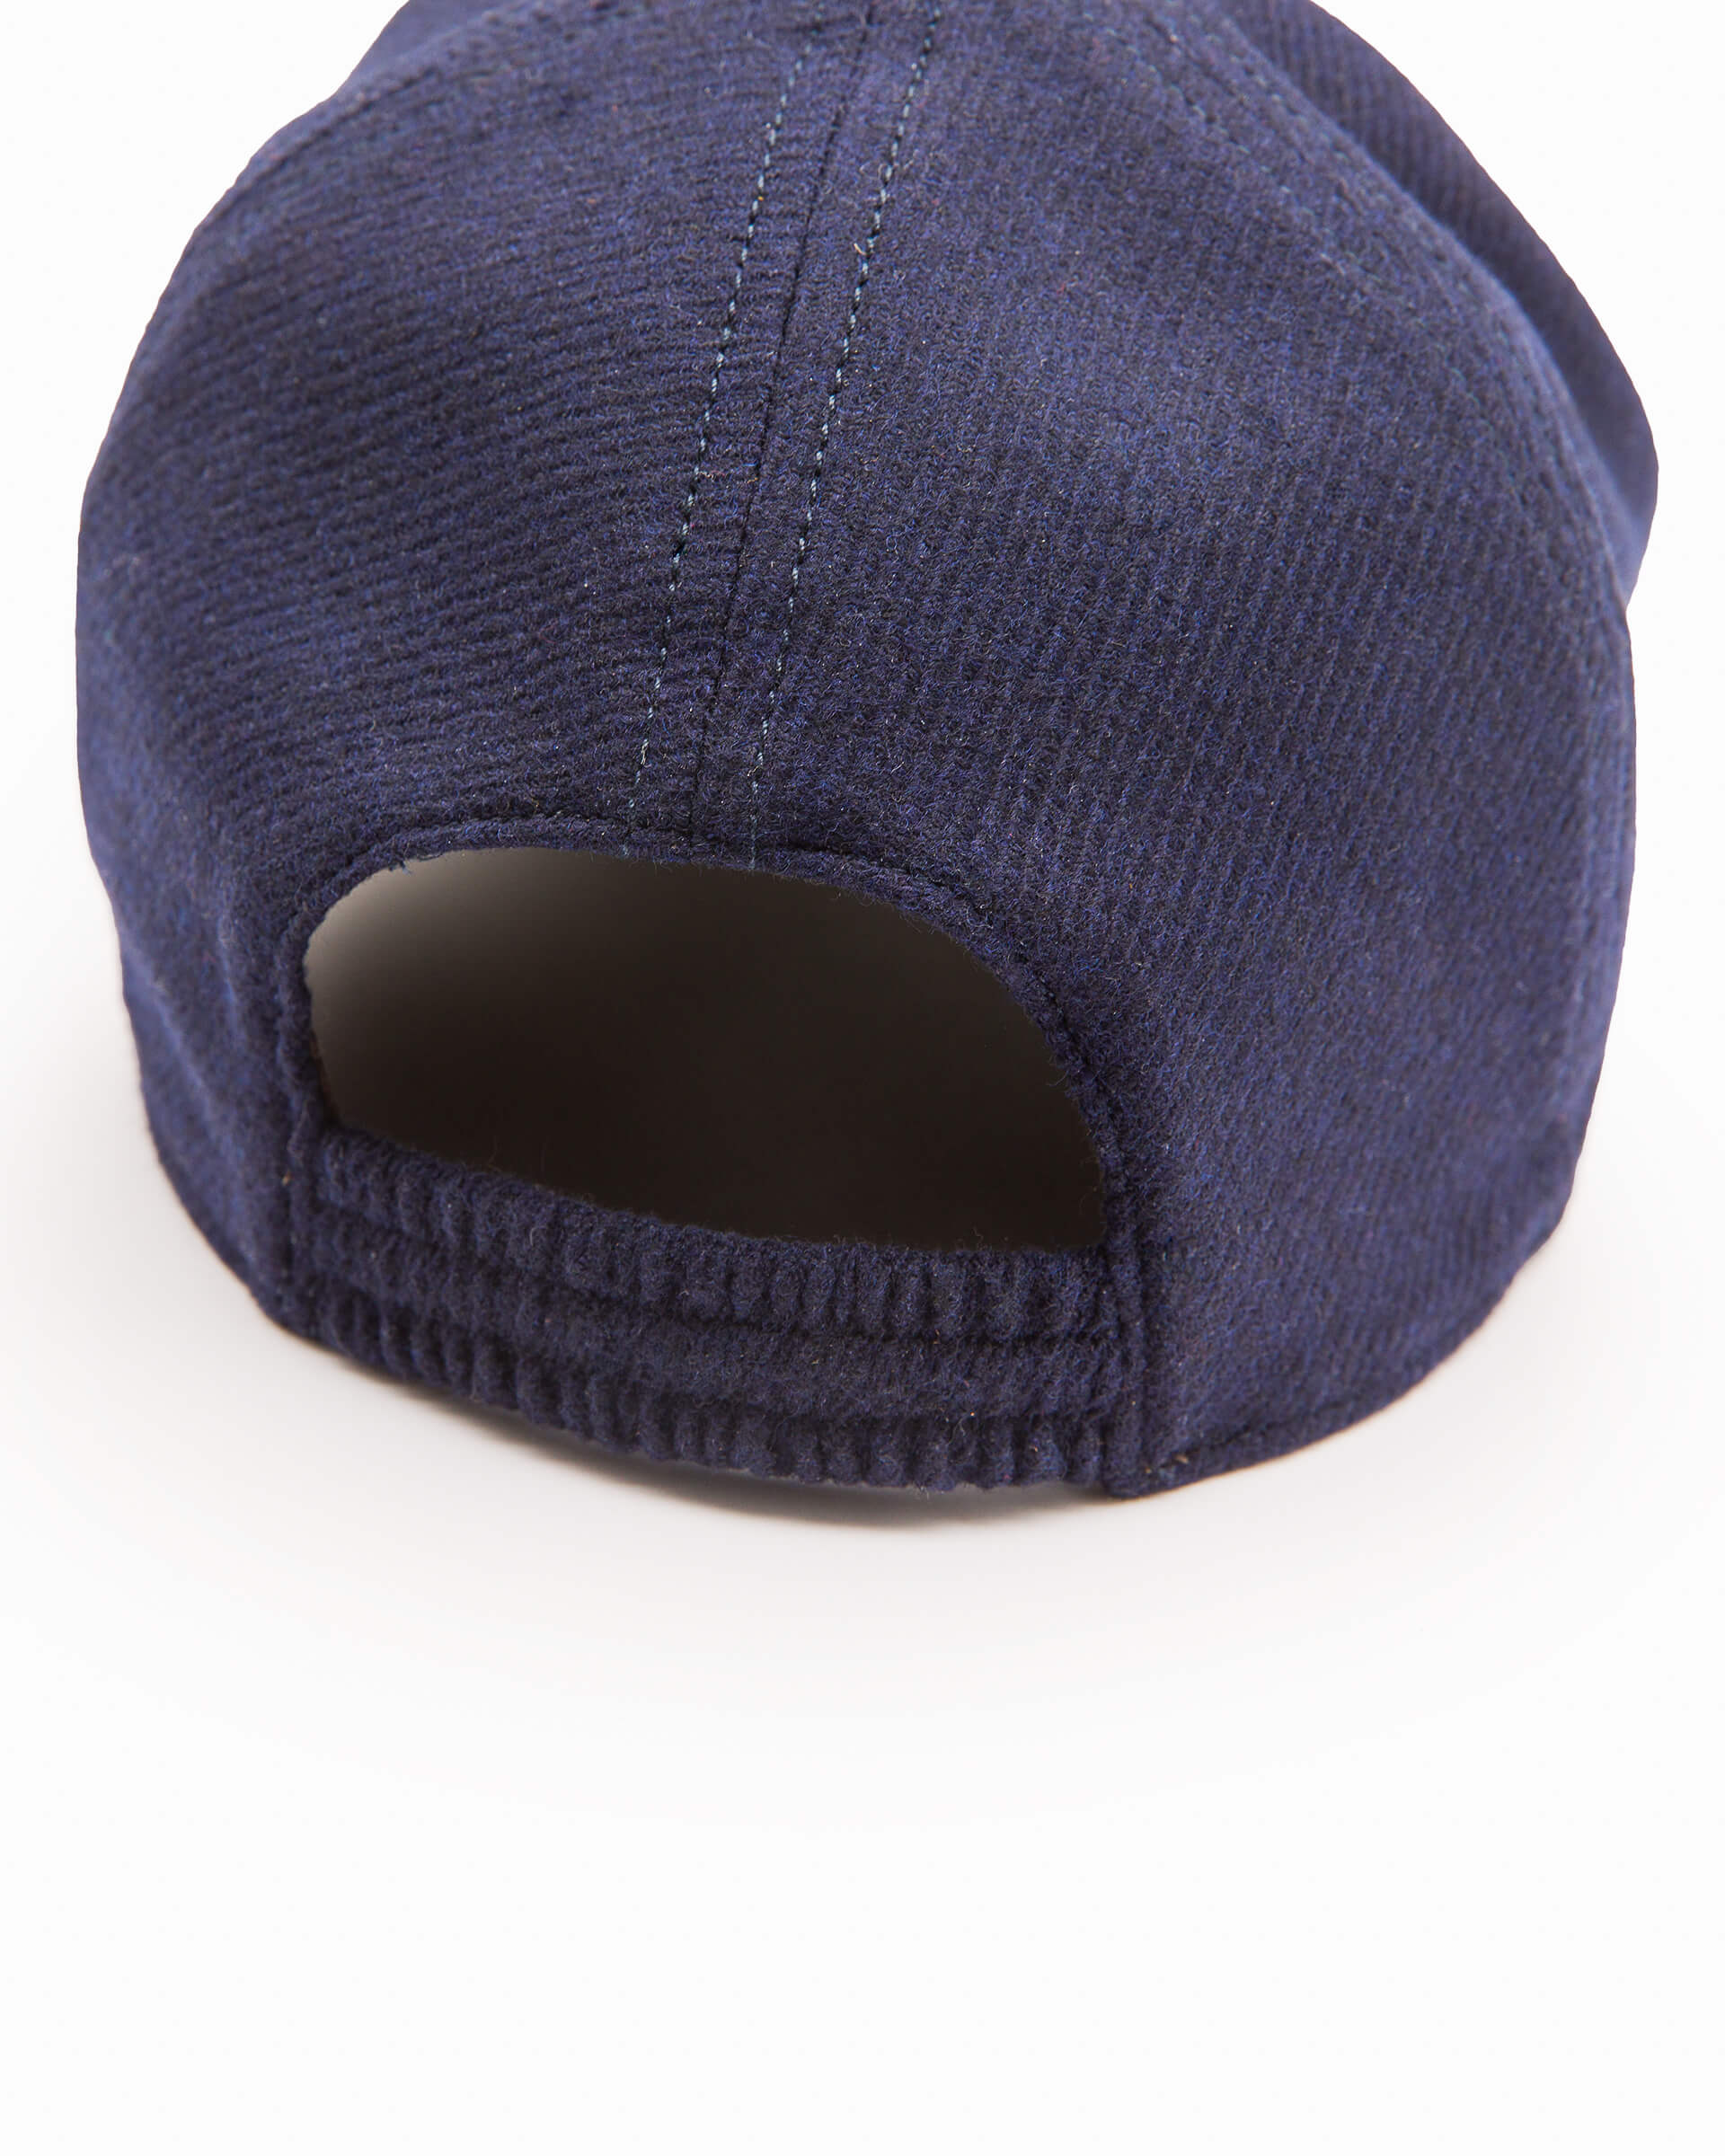 Baseball cap Ventura - with hat cashmere water-repellent eclipse of visor made blue Andrea Firenze